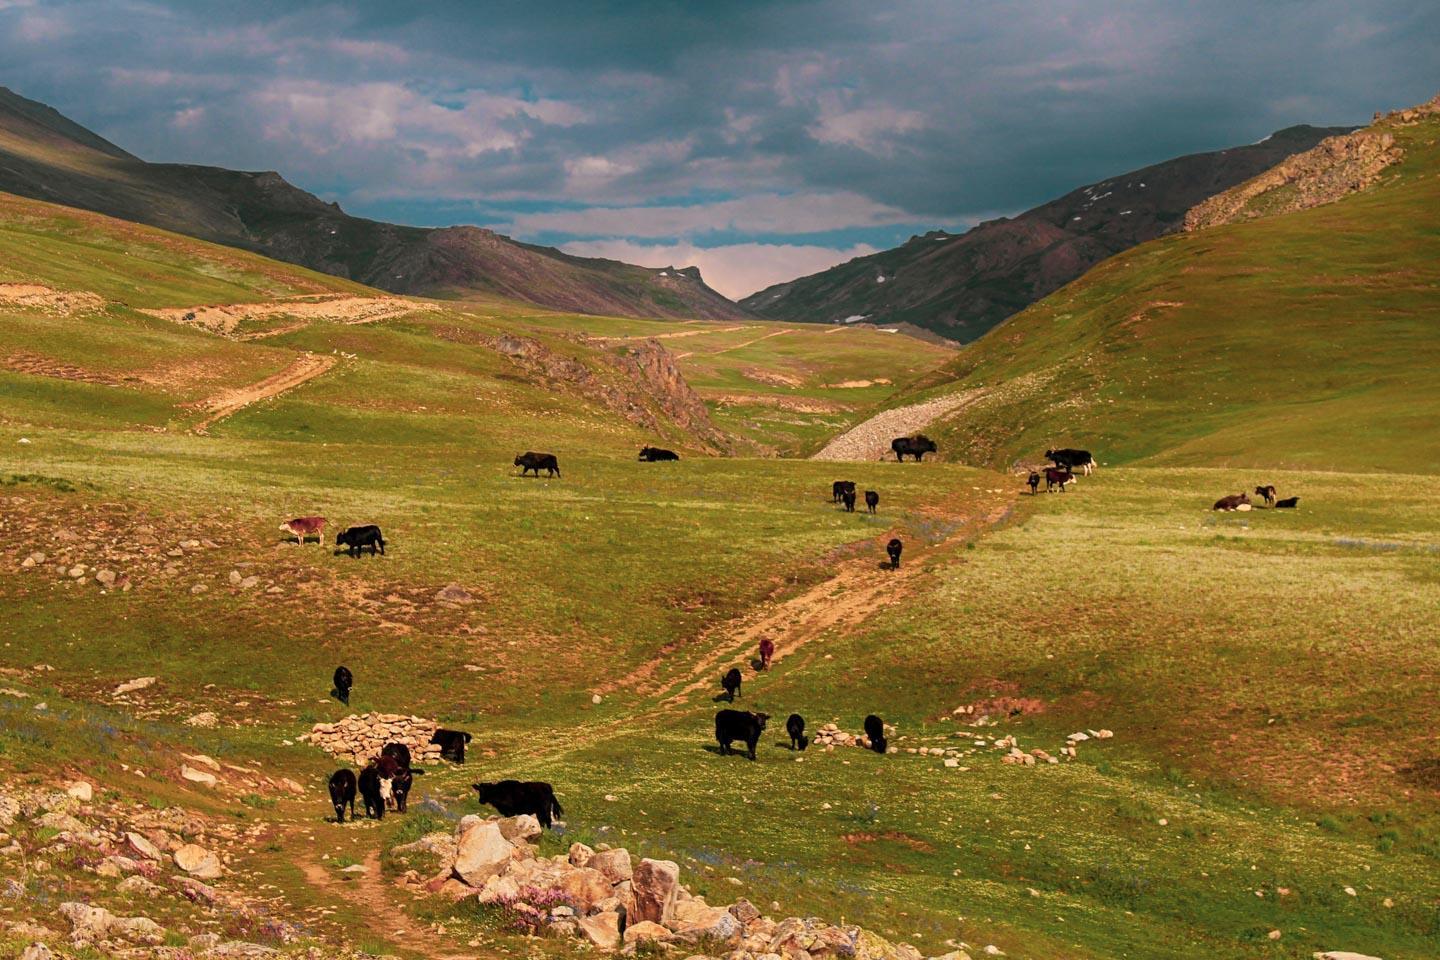 Only Seven communities have the gazing rights in selected zones of Deosai National Park